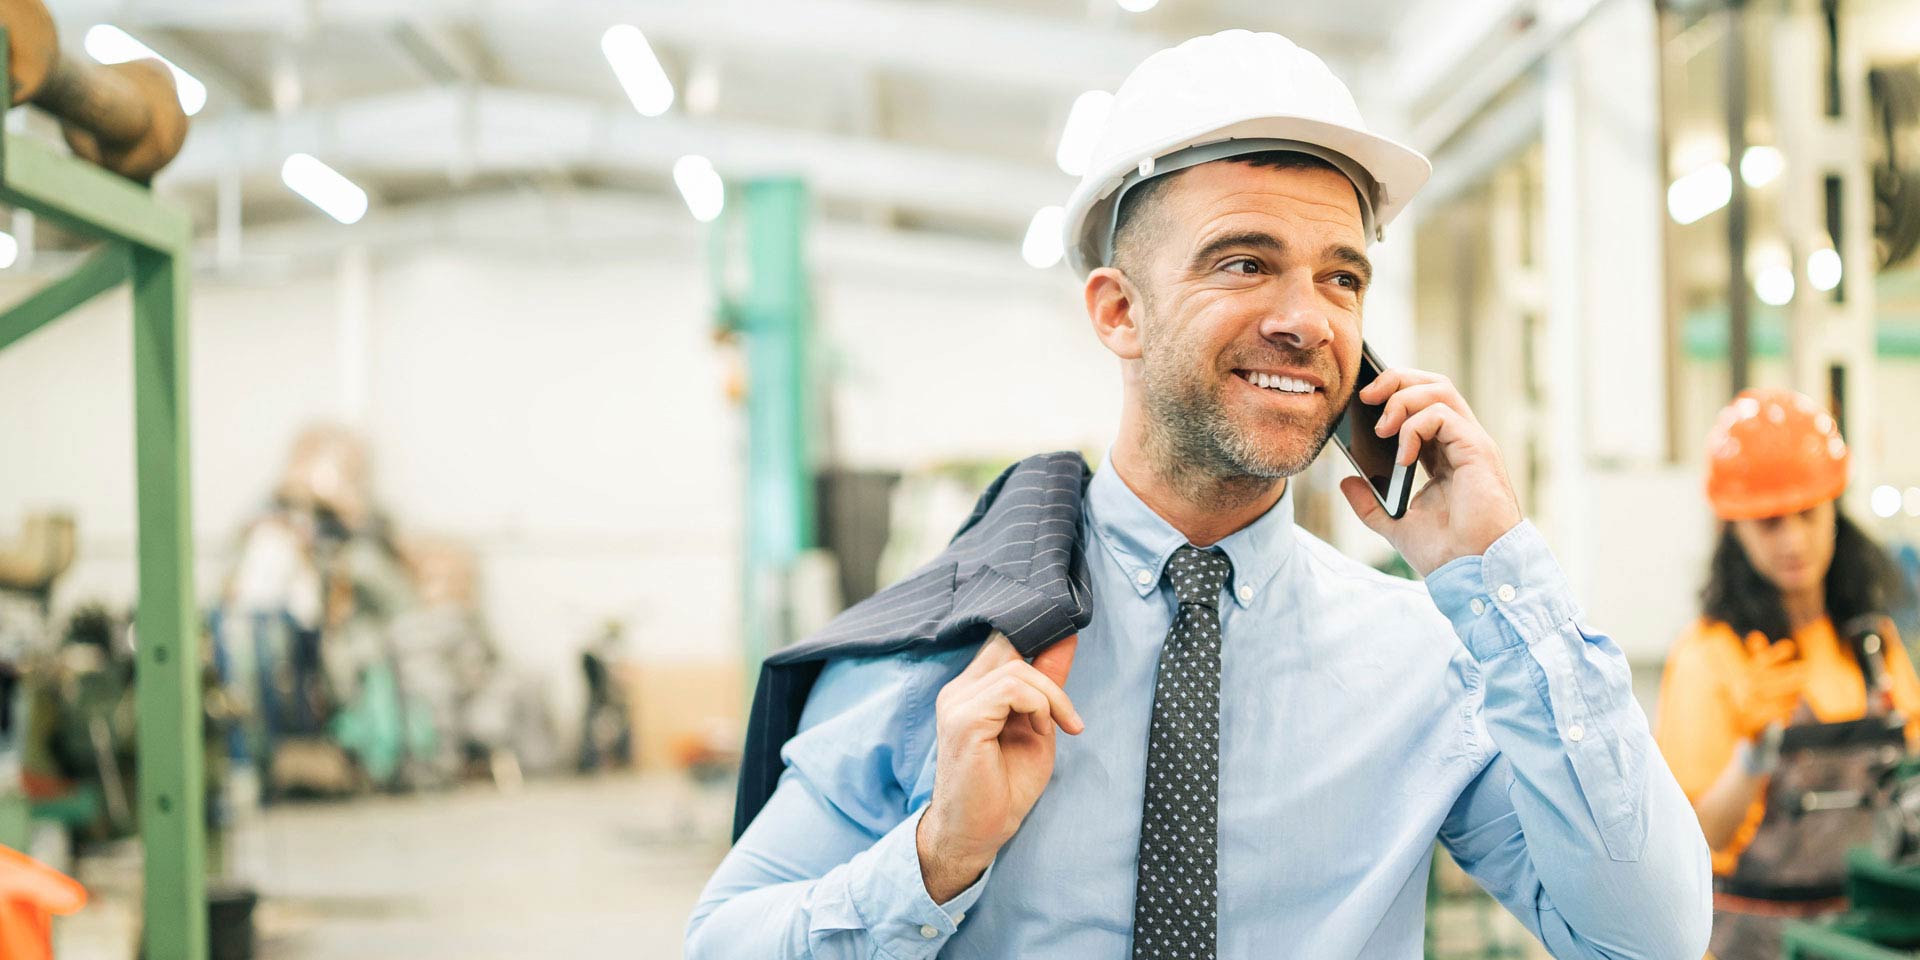 A business manager who received a Term Loan for his business talks on a cell phone while wearing a hard hat in a warehouse